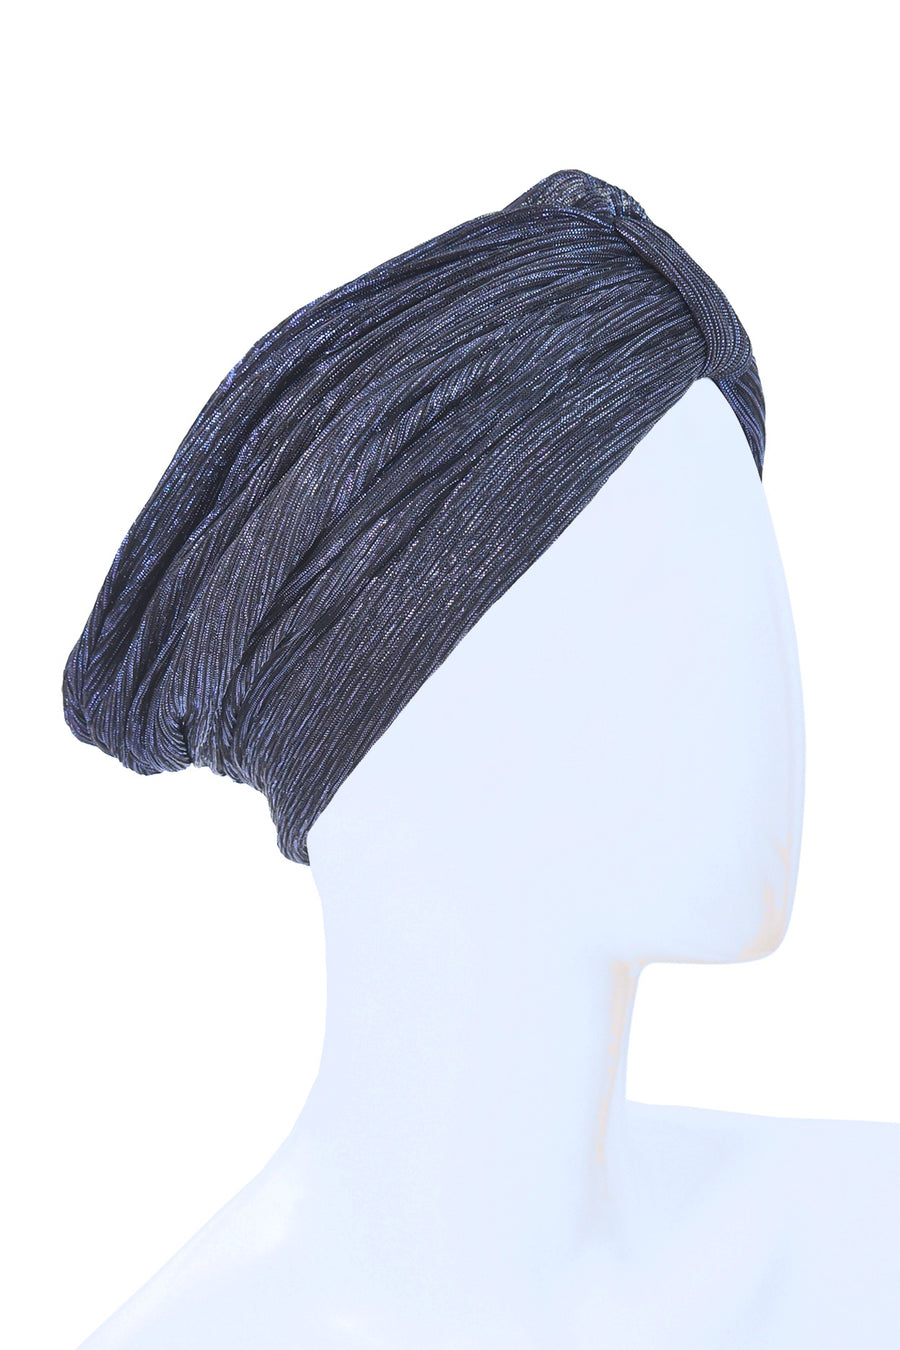 Black and blue sparkly turban - NEW !